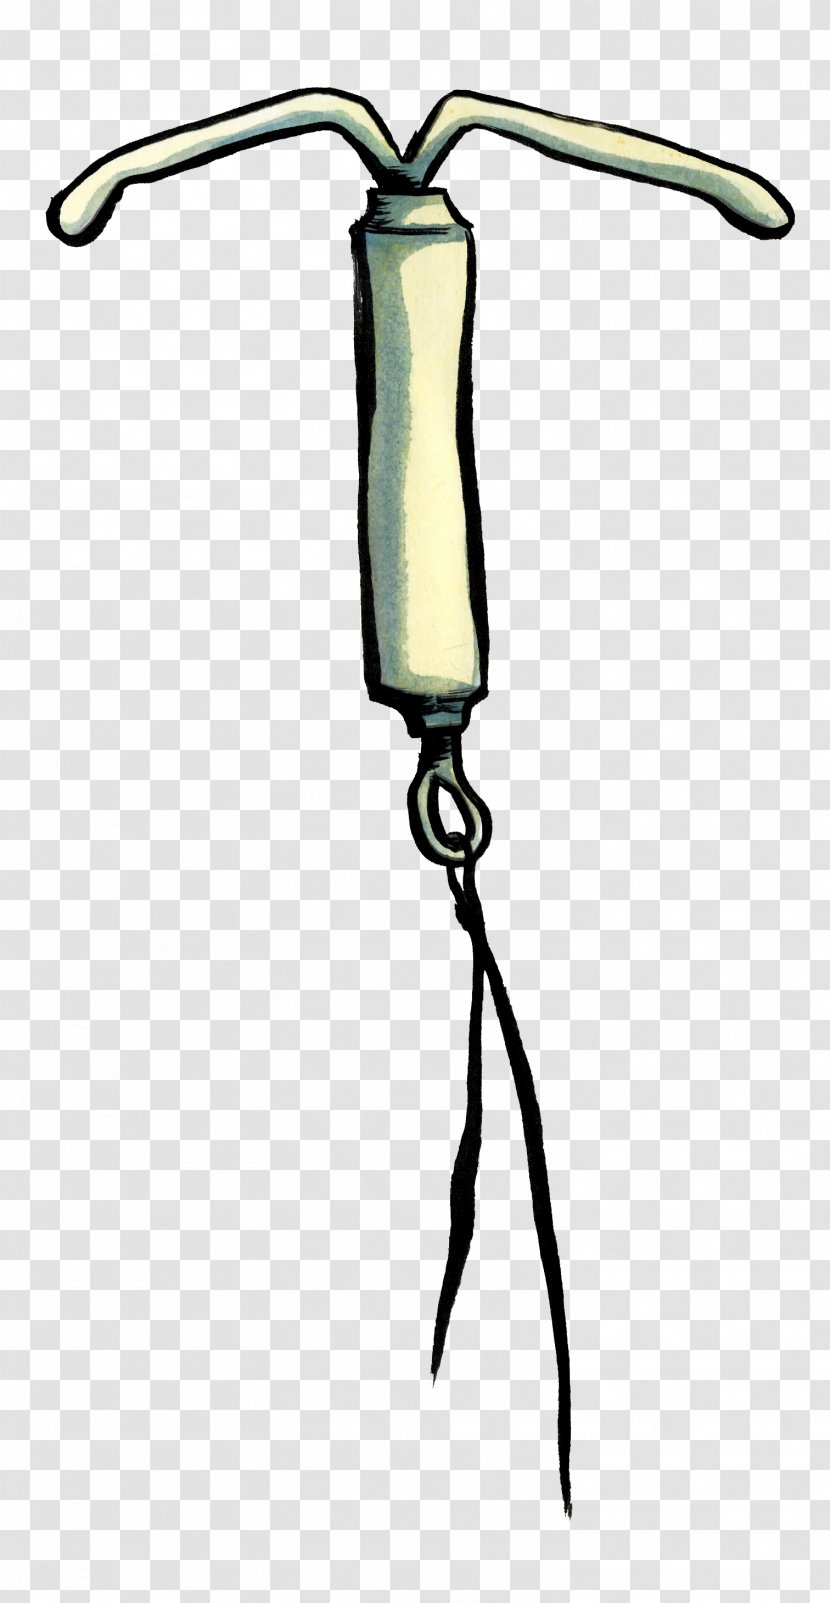 President Of The United States Patient Protection And Affordable Care Act Intrauterine Device - Warm Blood Anti Japanese Victory Transparent PNG